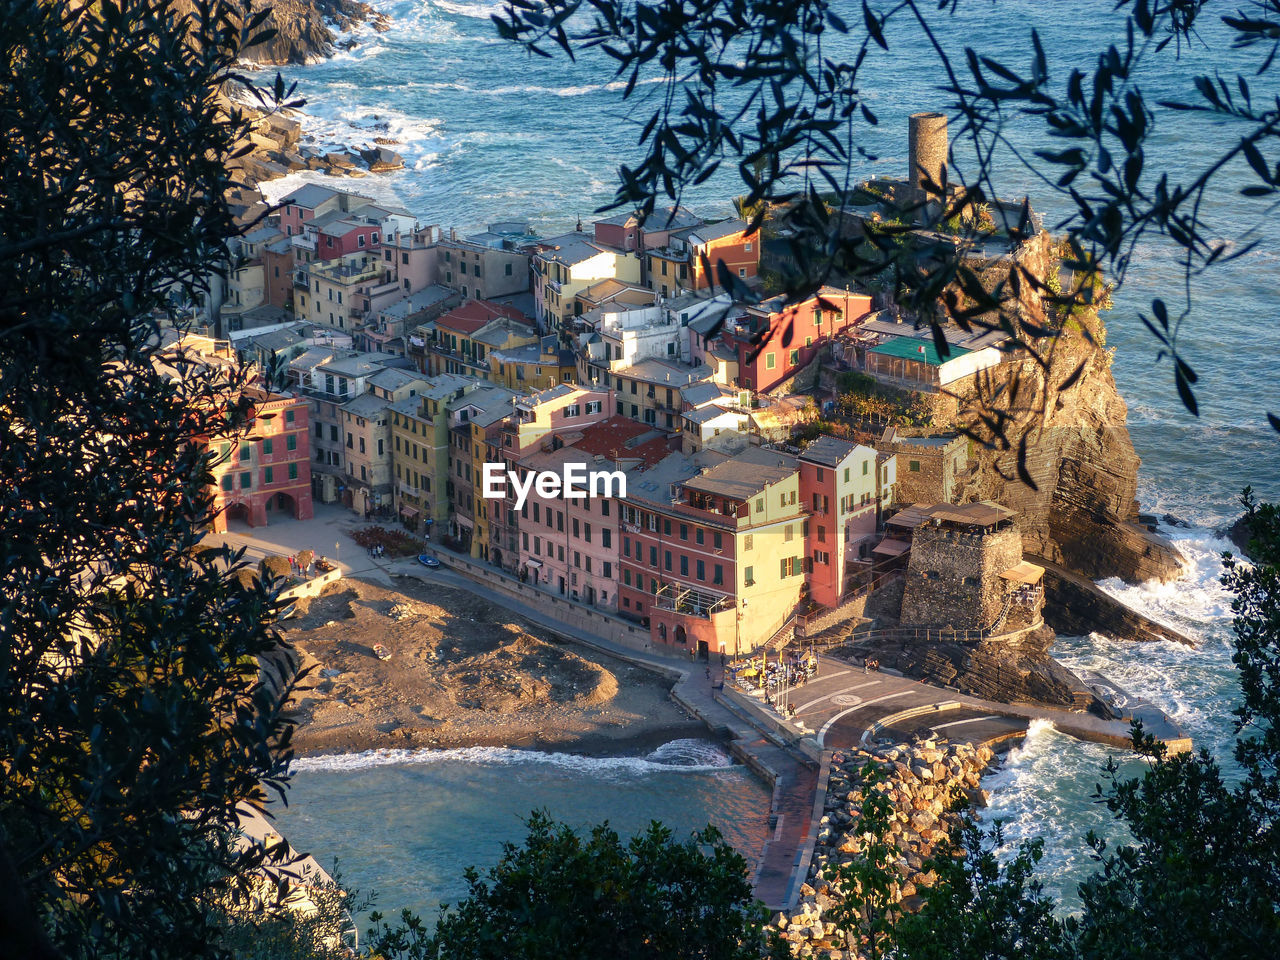 Vernazza seen from one of the various paths that can be traveled in the cinque terre, italy.